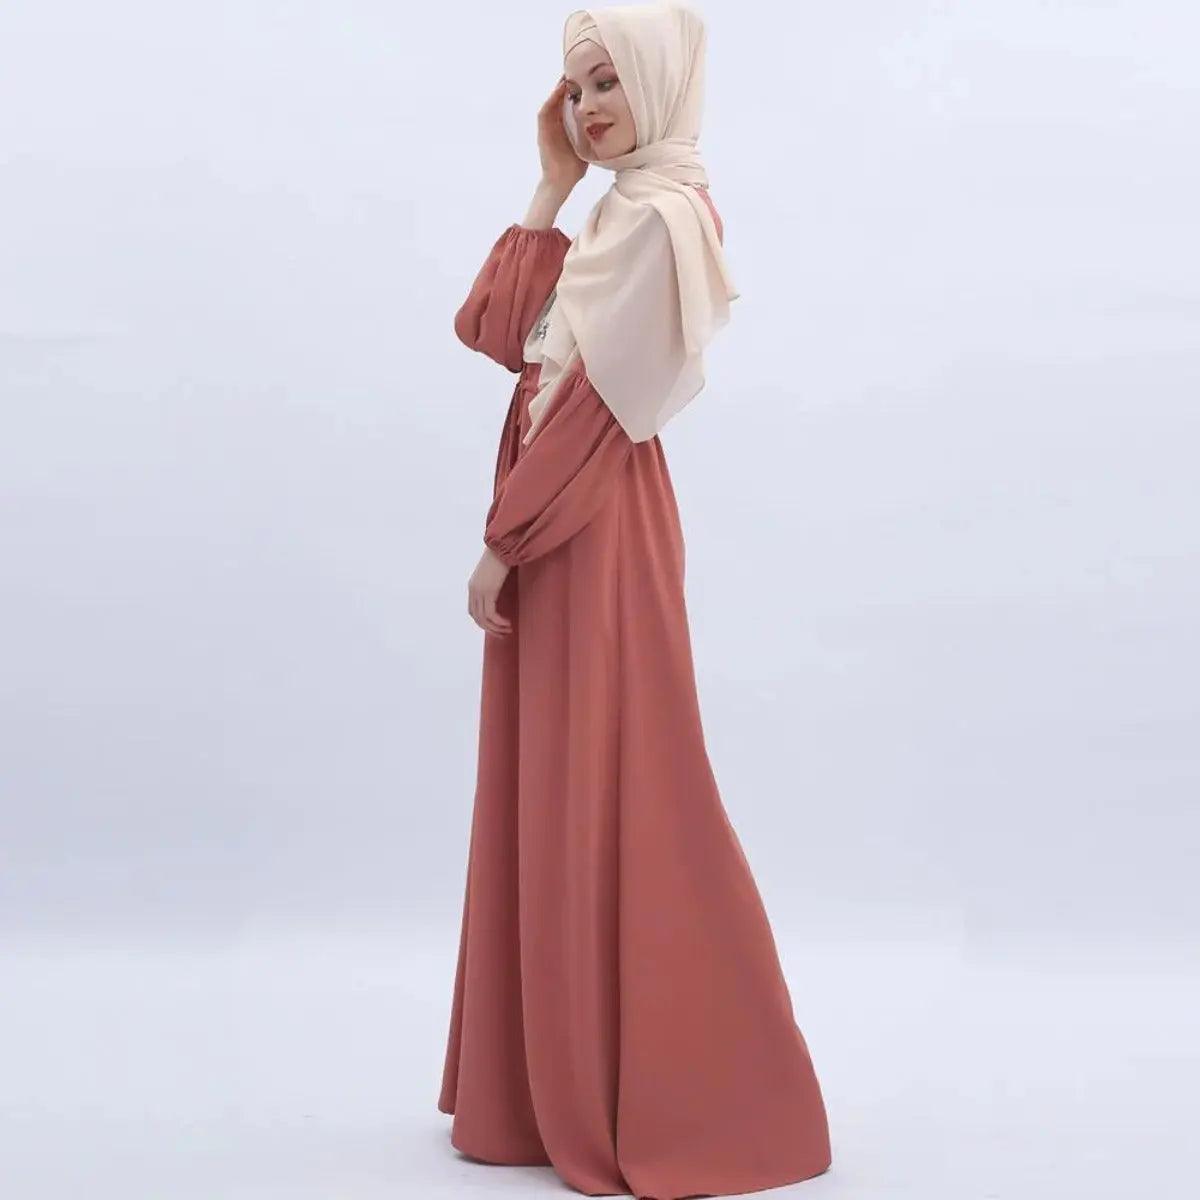 Women's Puff Sleeve Plain Abaya Dress - Mariam's Collection - Mariam's Collection